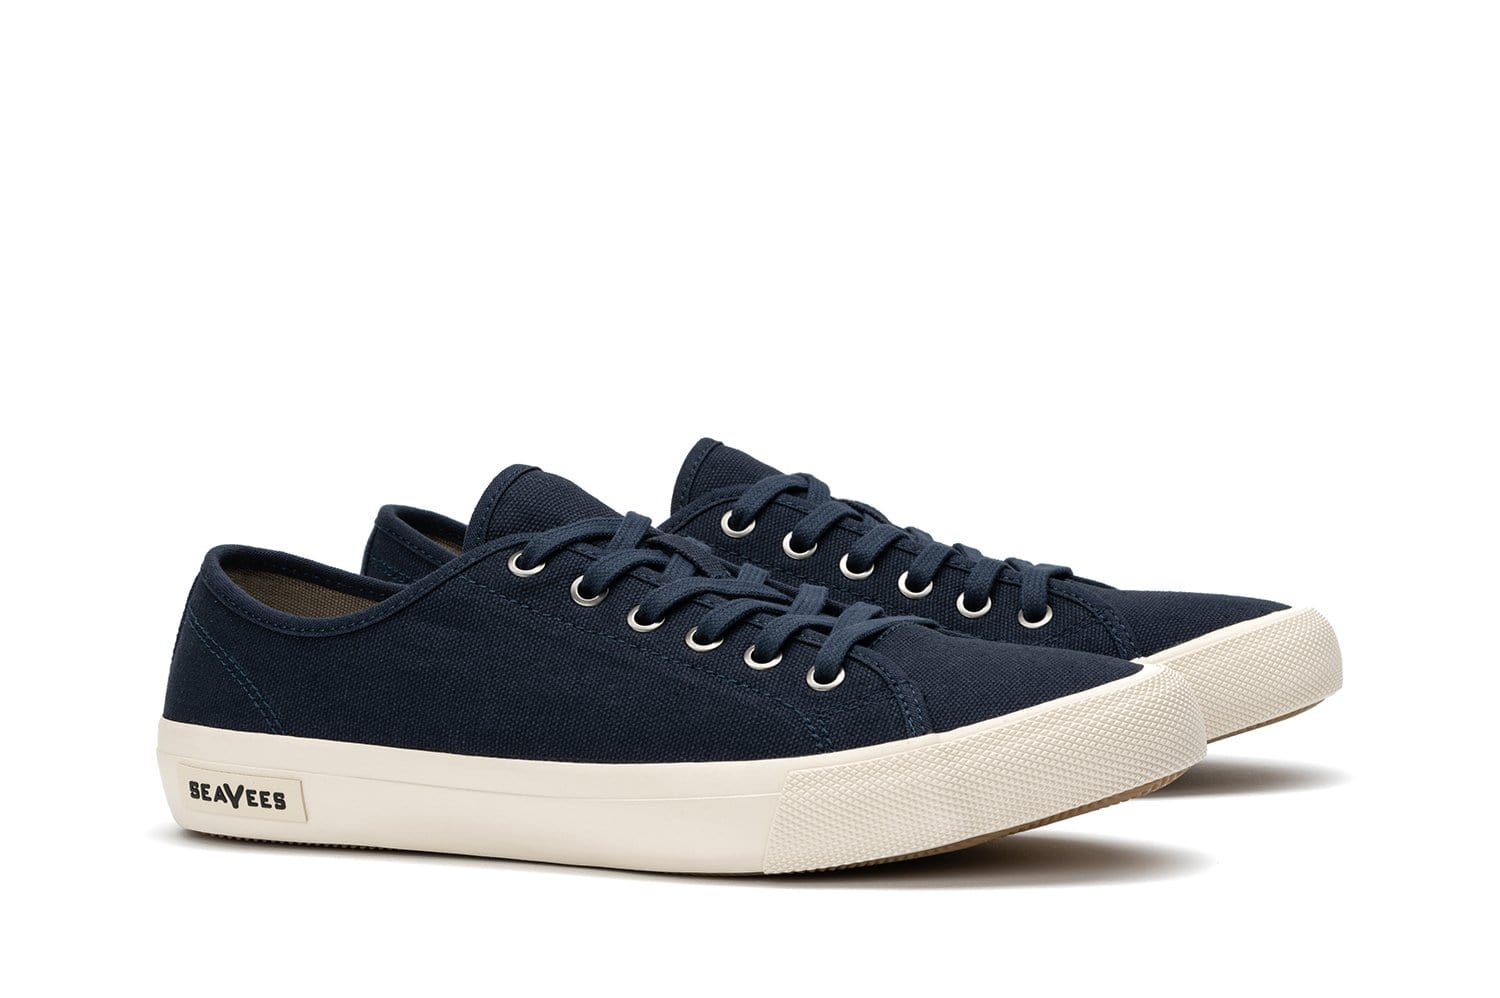 seavees monterey canvas lace up sneakers